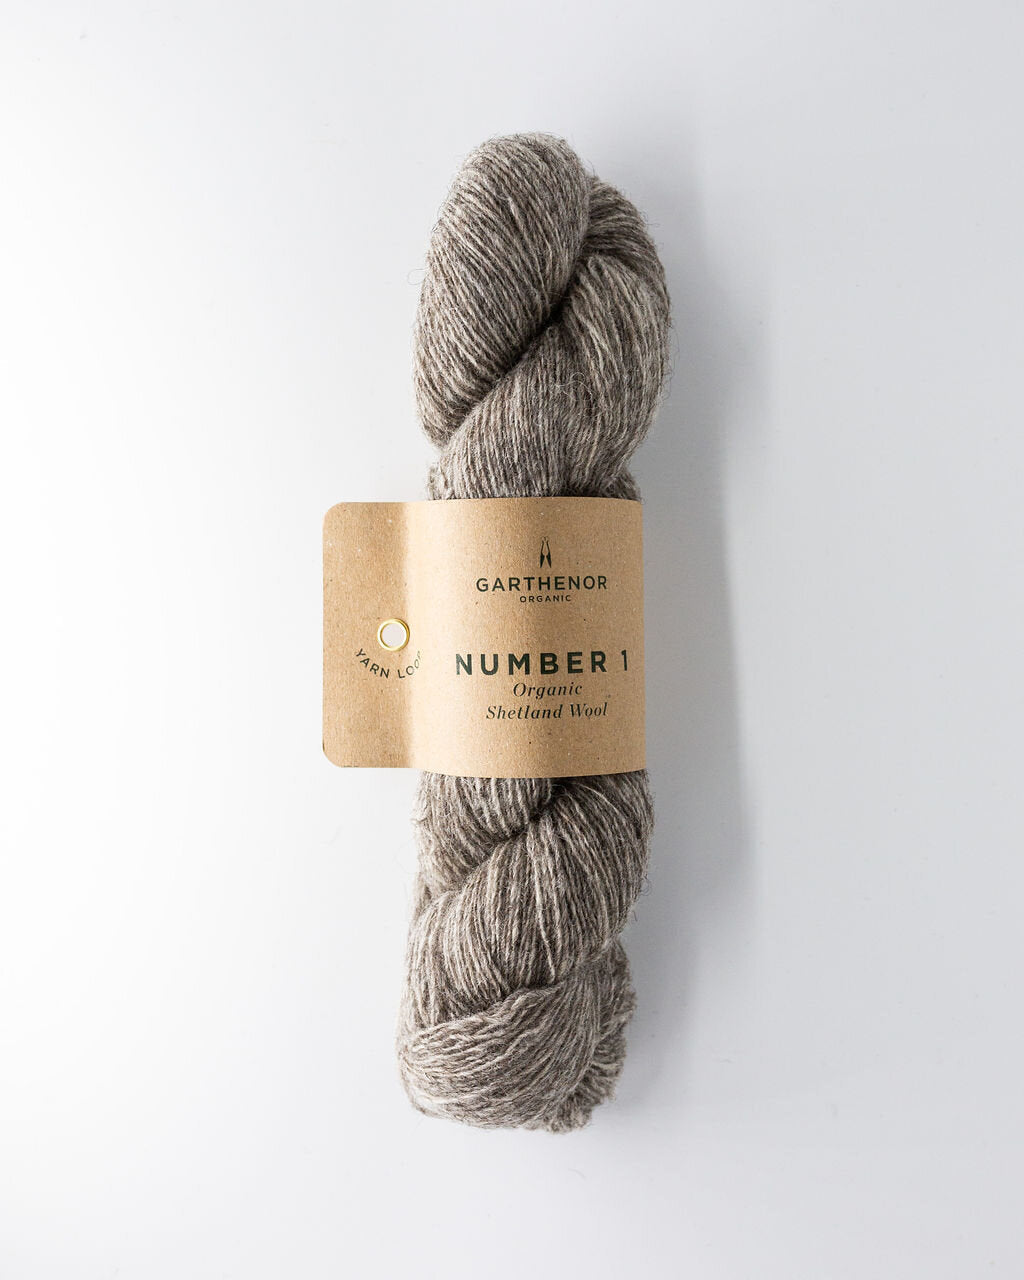 Wooldreamers Manchelopis - Making Stories - Knitting Sustainably.